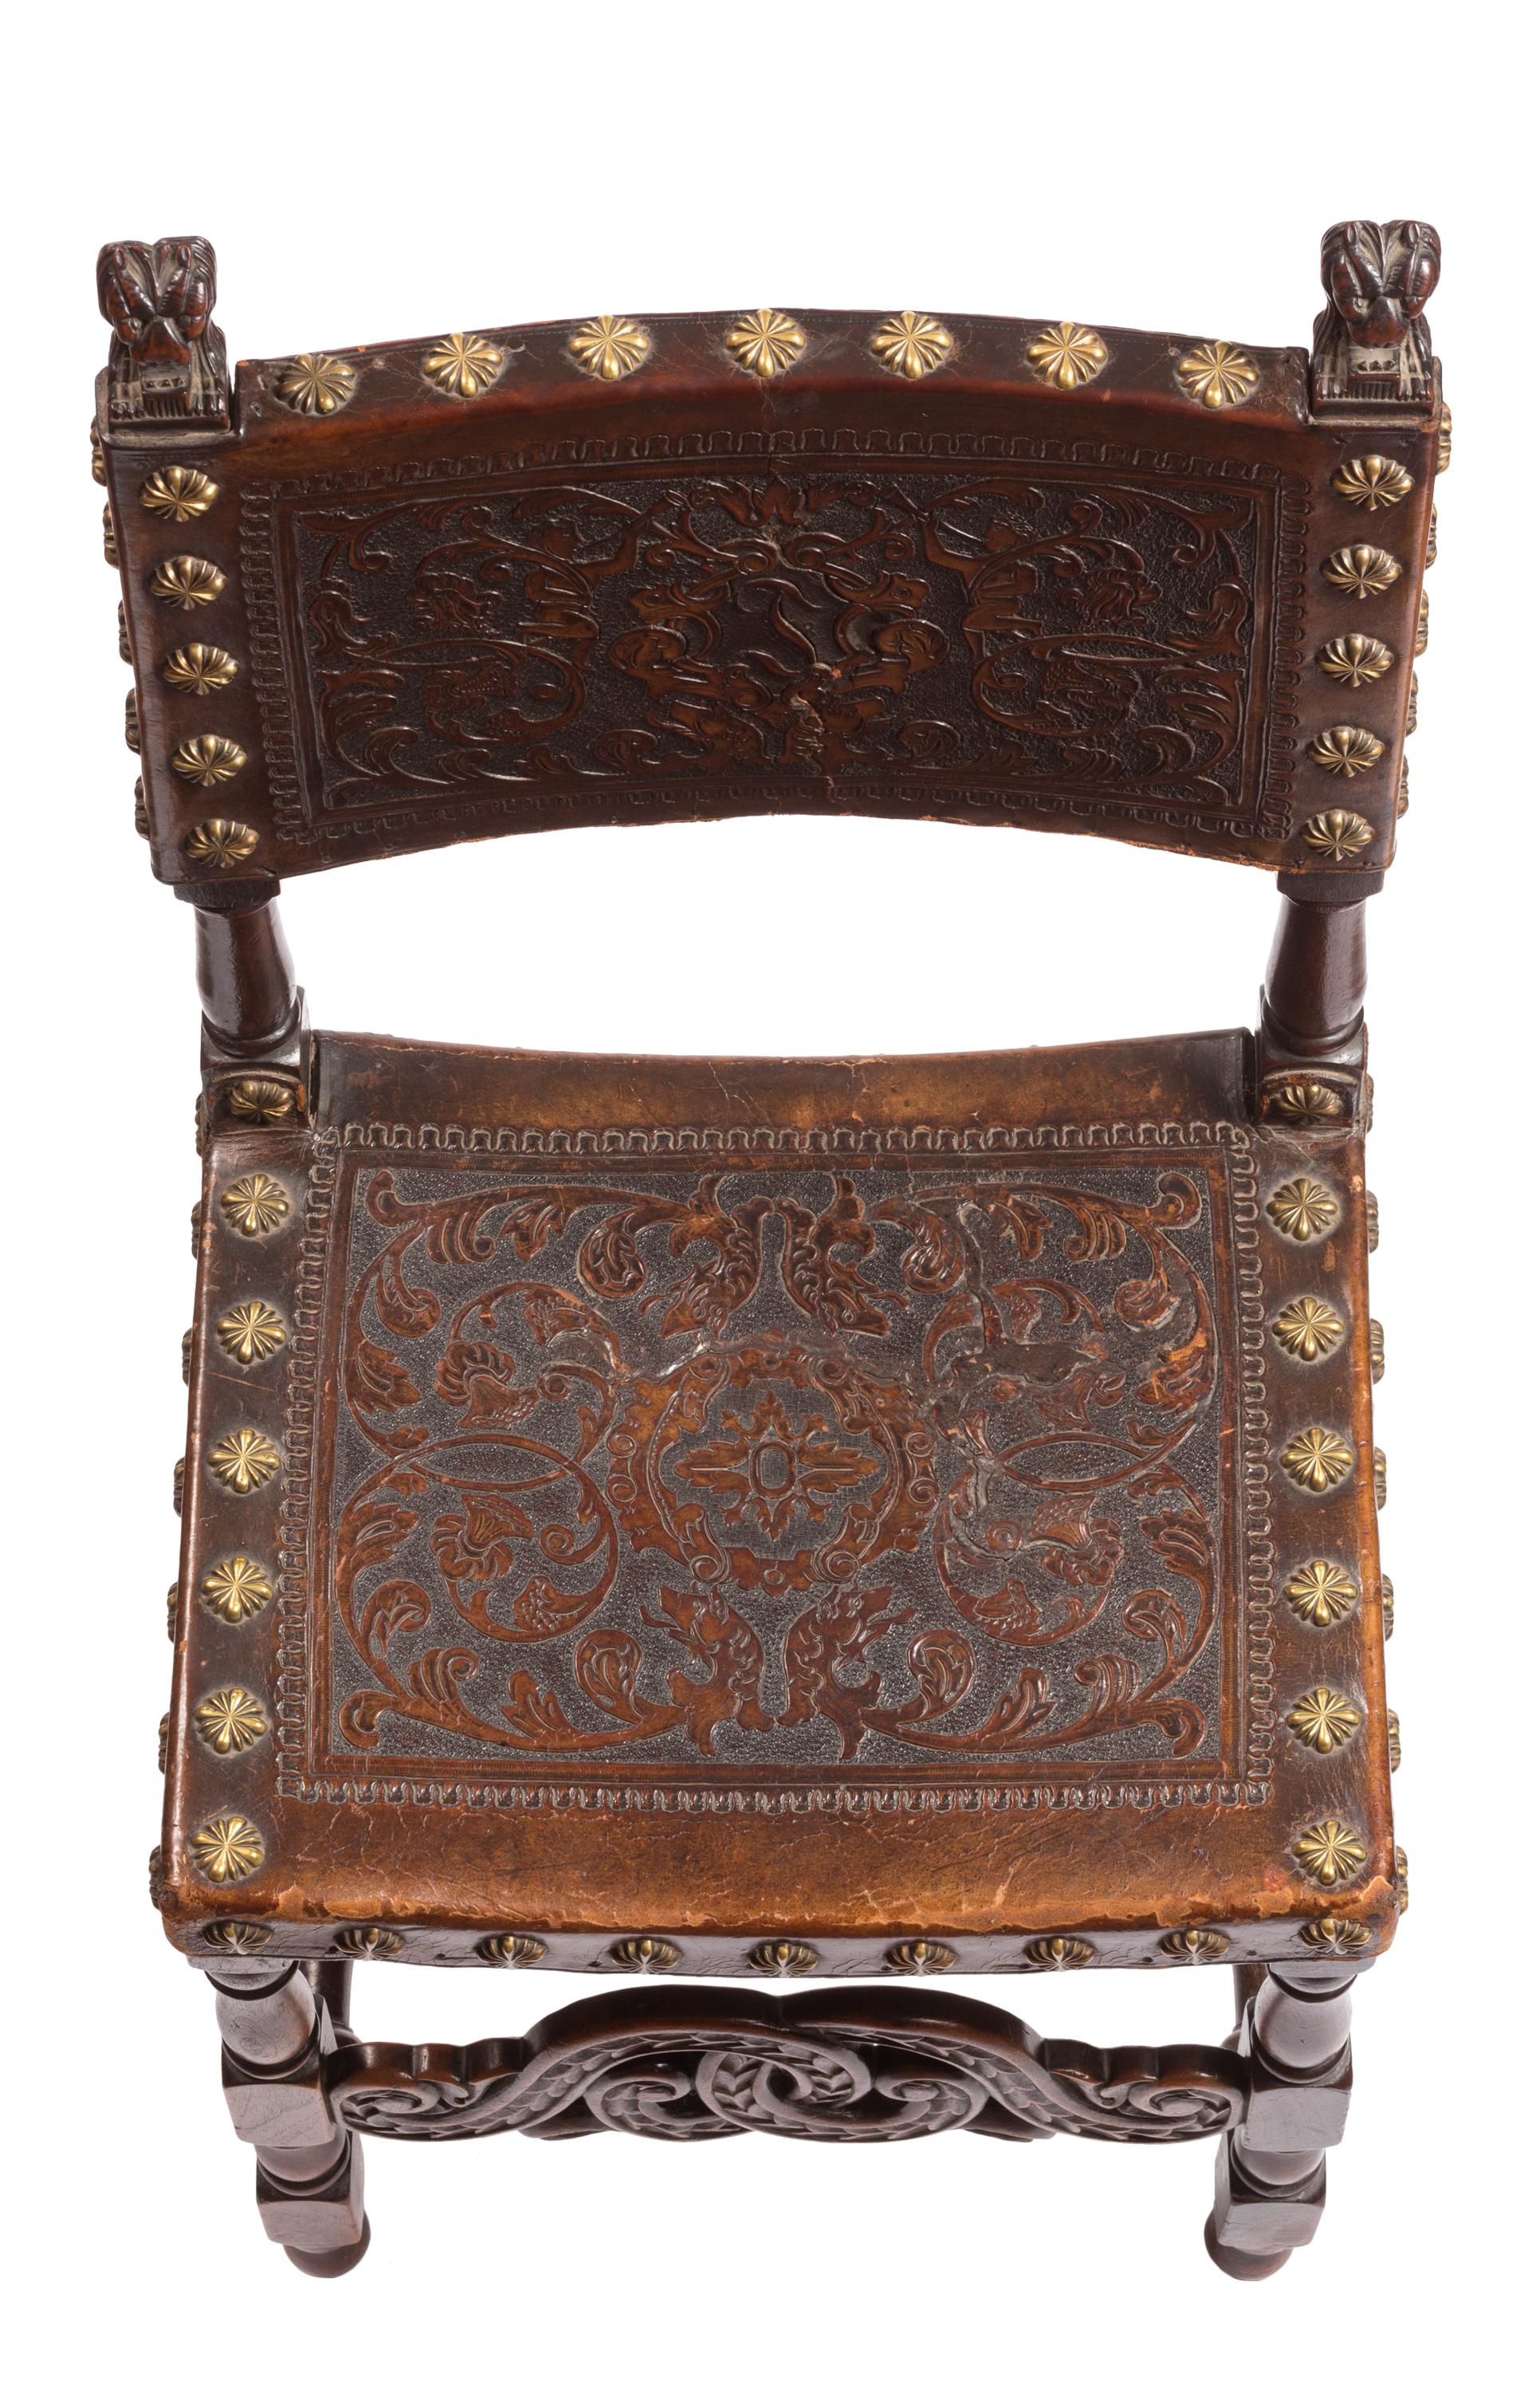 A matched set of four 18th century Spanish embossed leather chairs with nicely hand-carved detailing. The leather of the chairs are decorated with intricate flower and vine designs on the seats, and on the backs there are abstract vines surrounding